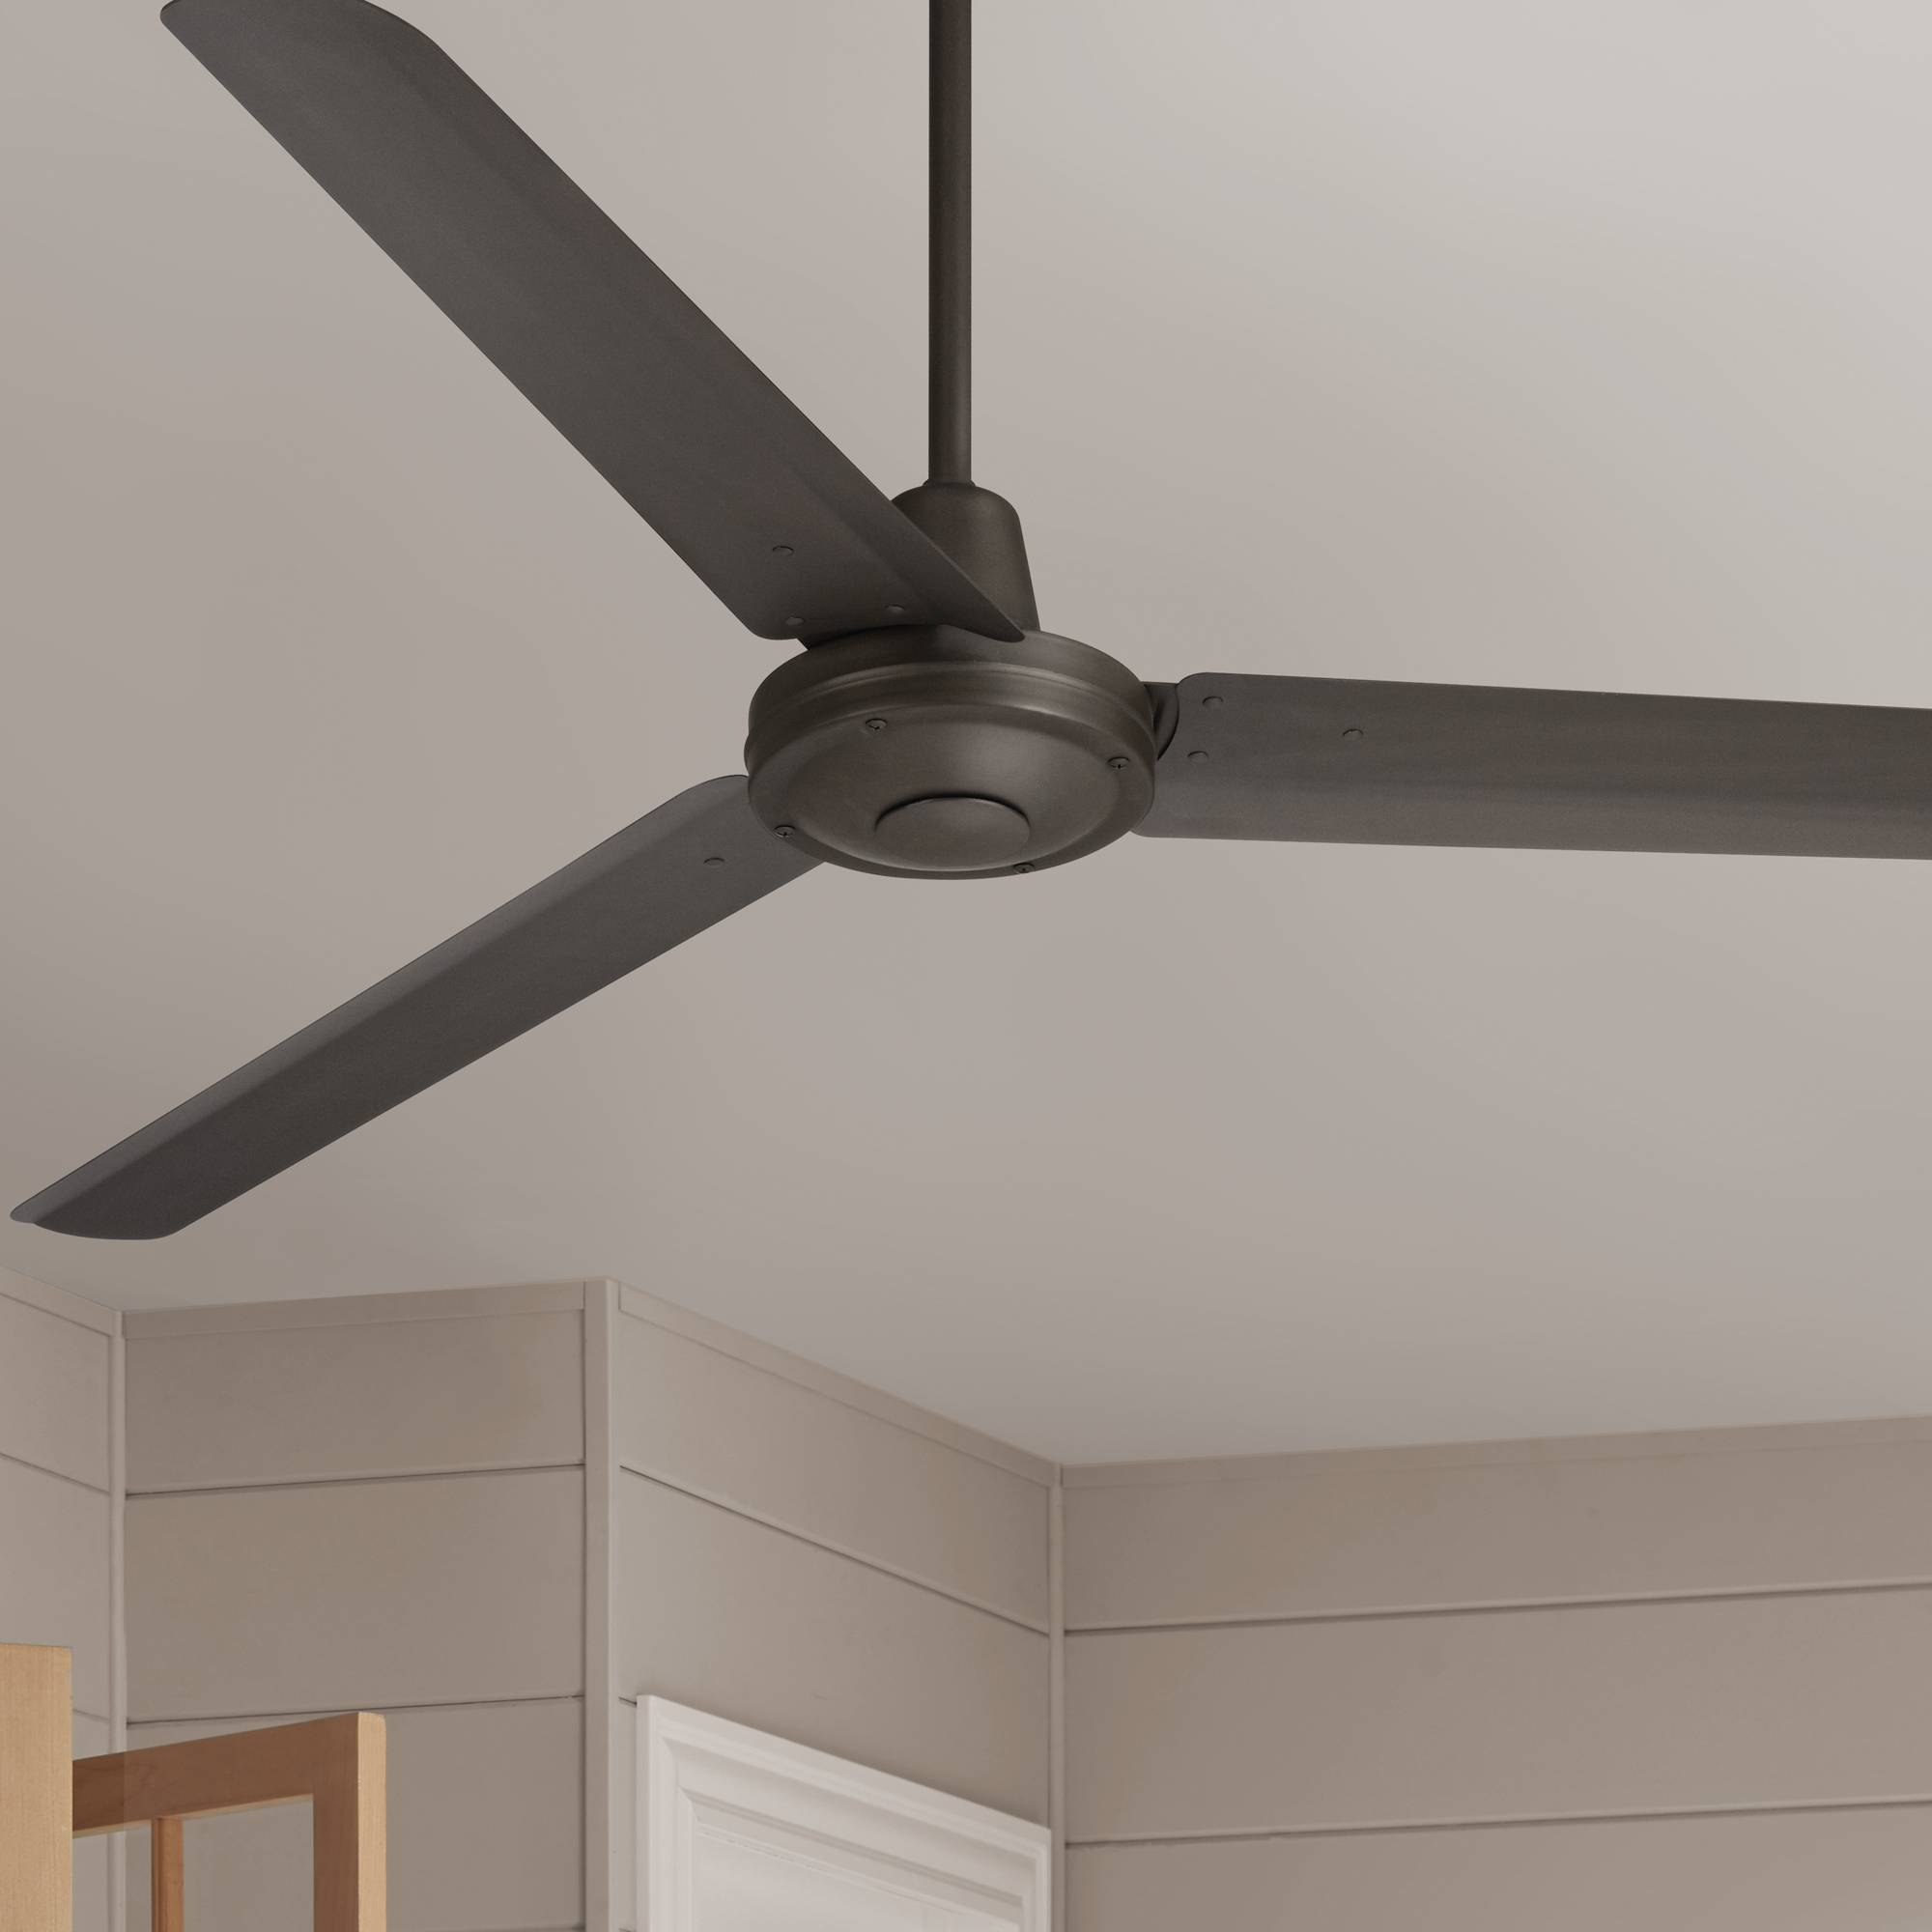 Details About 60 Modern Industrial Ceiling Fan Oil Rubbed Bronze For Living Room